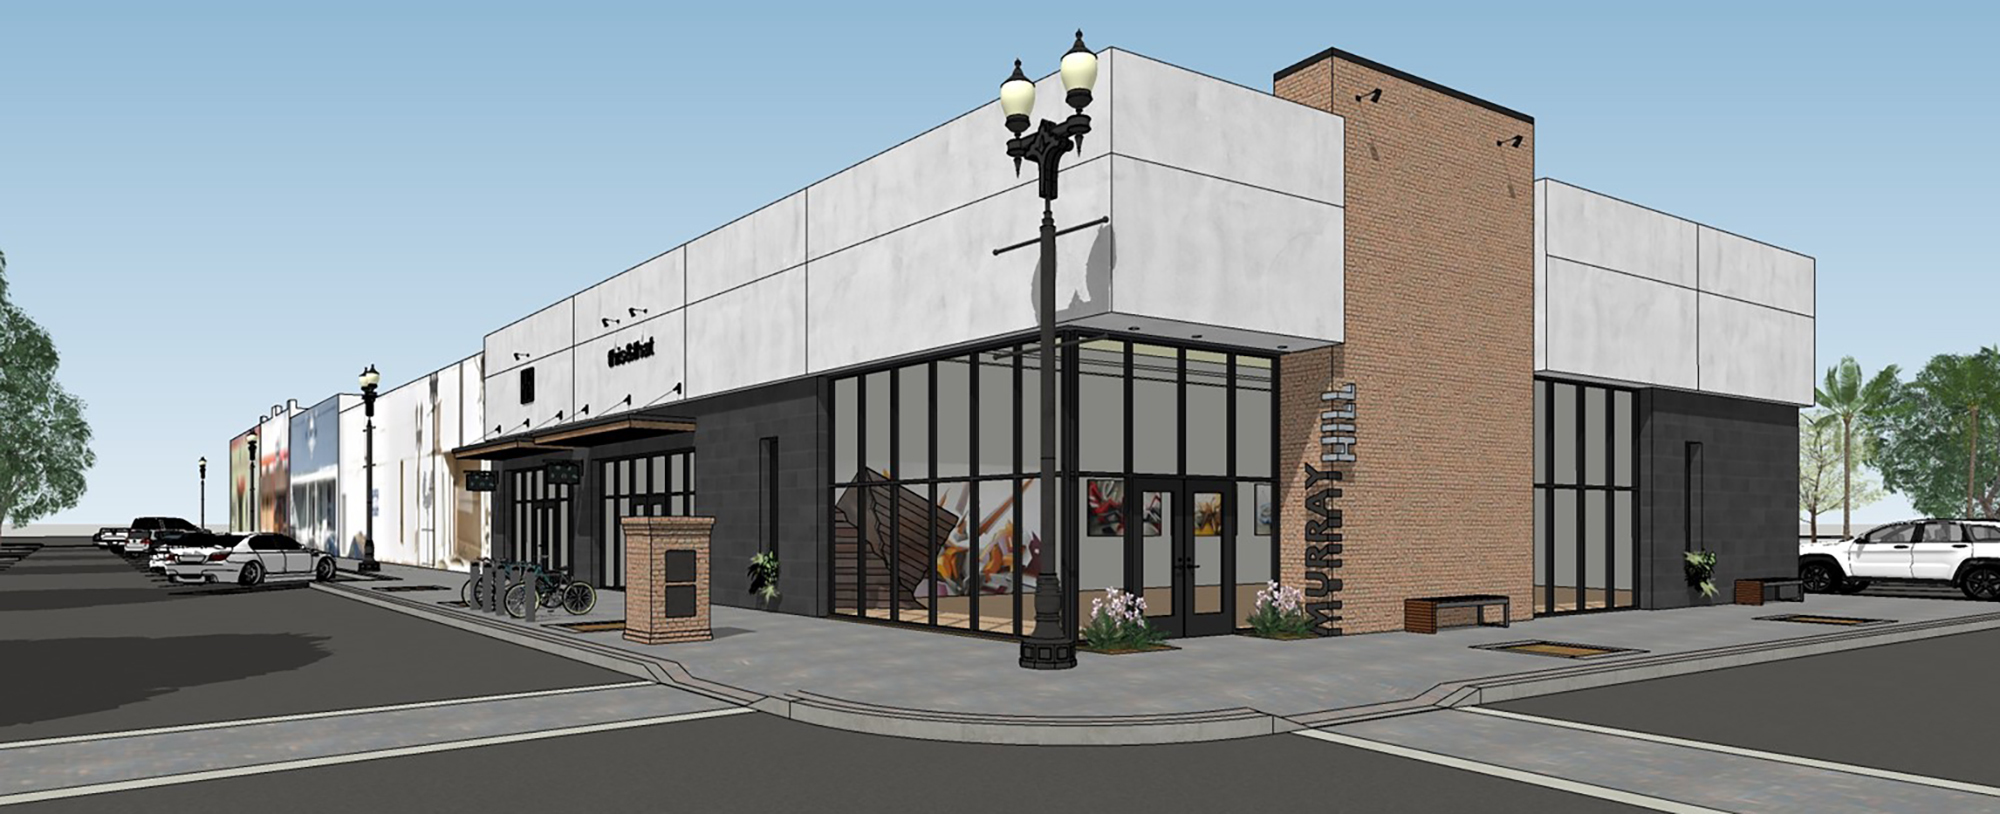 Developers want to build a 5,000-square-foot retail building at the site in a future phase.